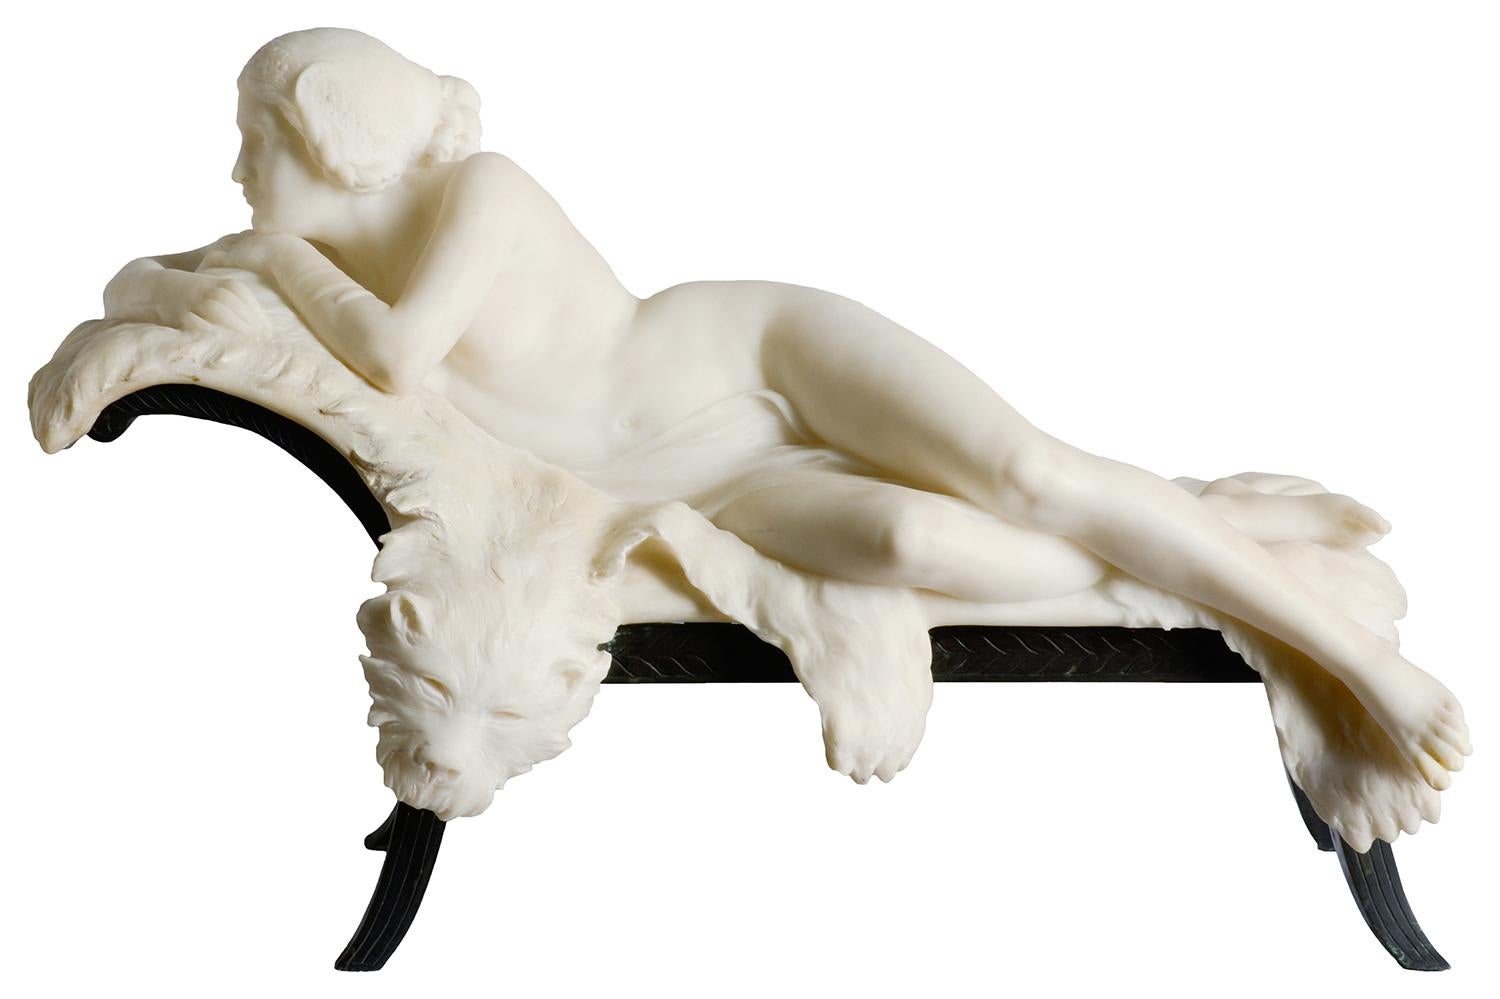 A fine quality late 19th century French marble statue of a classical female nude reclining on a tigers skin and bronze daybed.
Signed: G Gomlags.